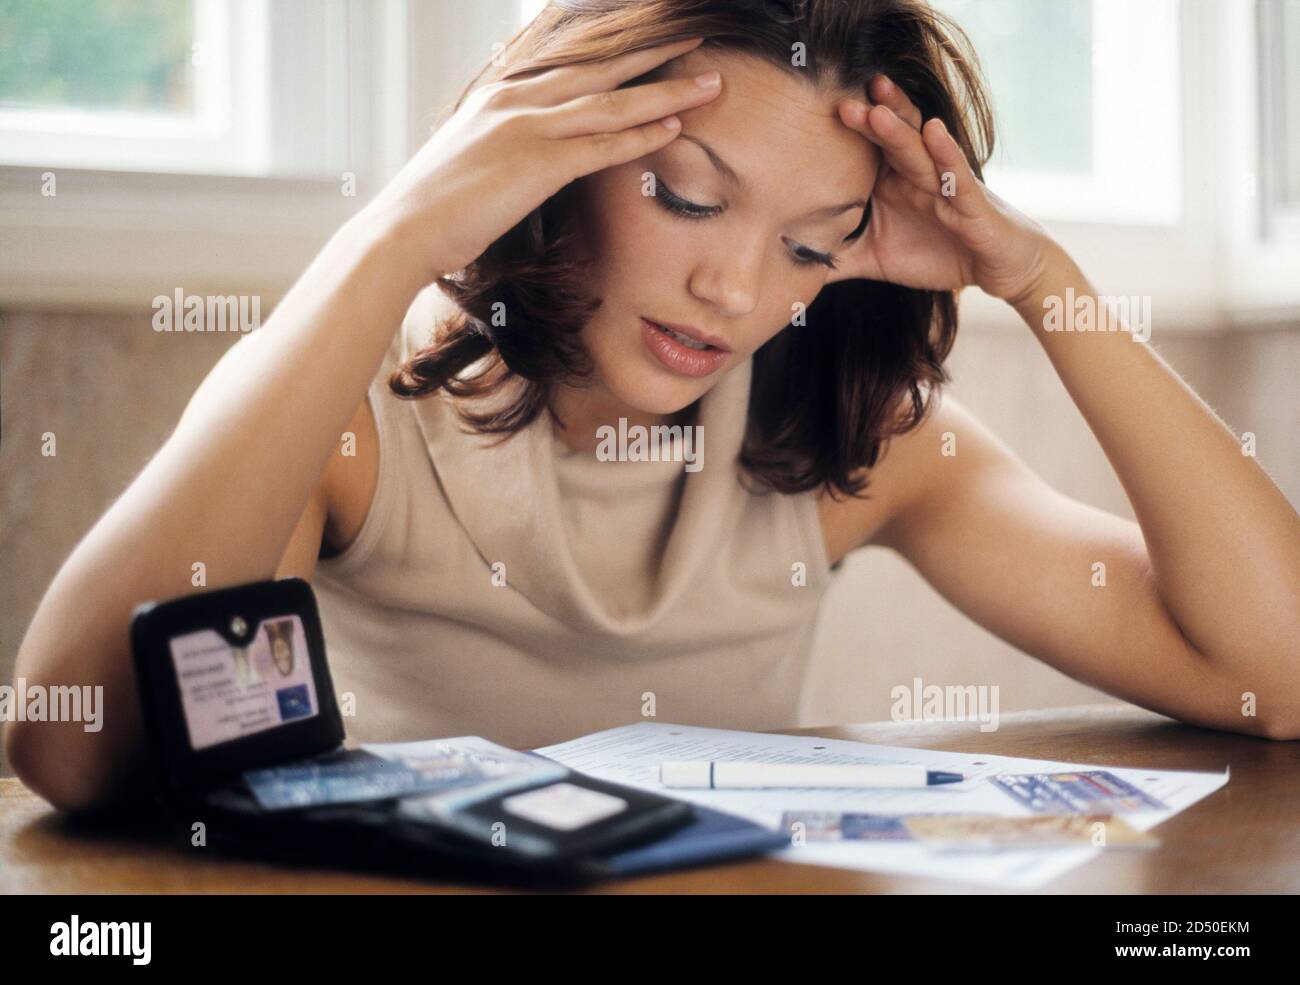 Worried woman looking at her bills Stock Photo